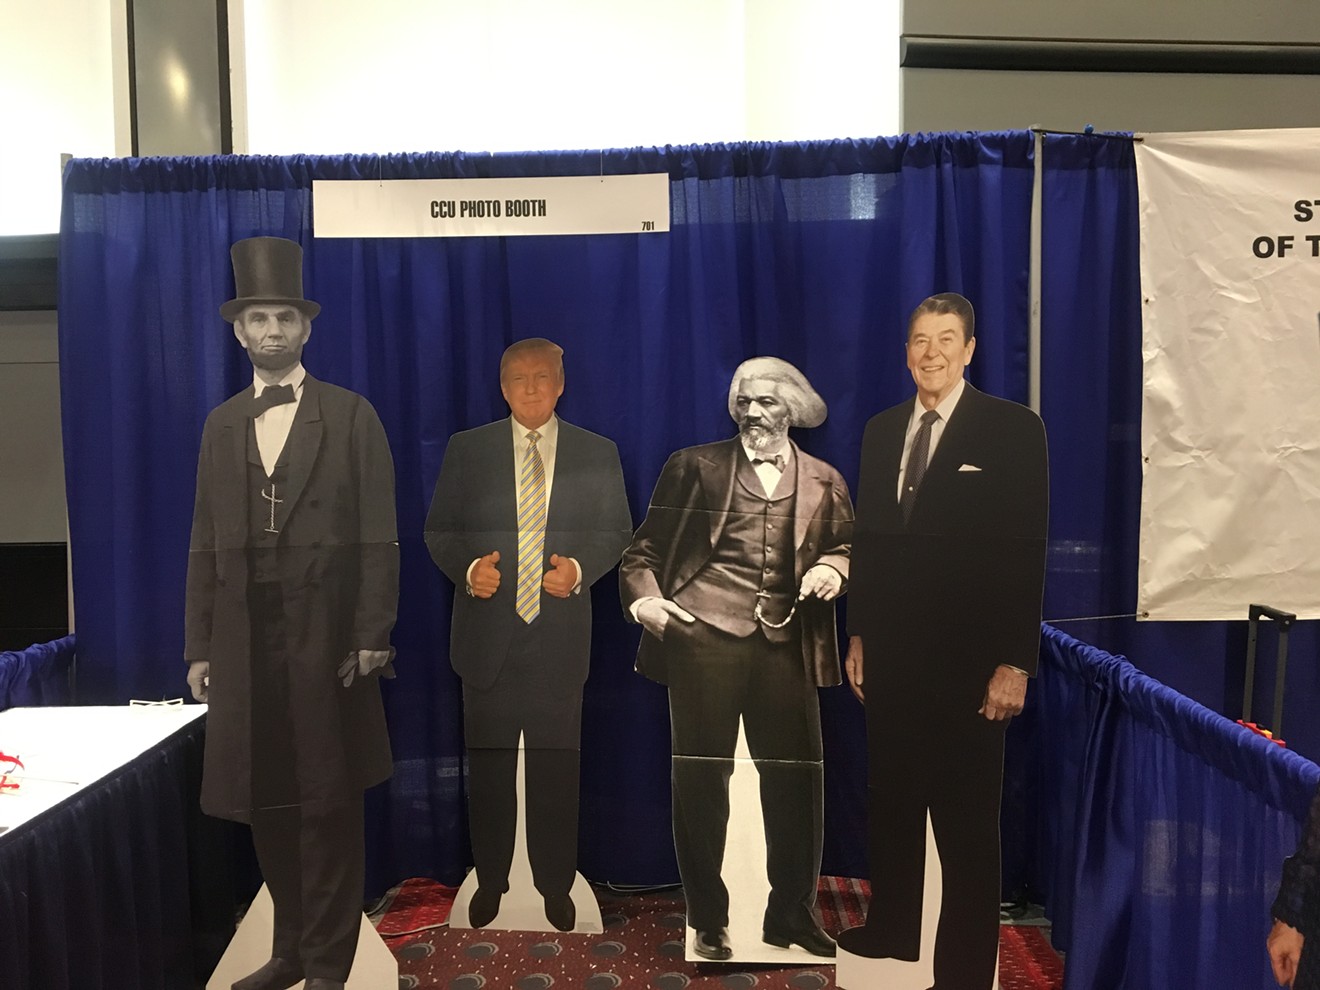 At the Western Conservative Summit Photo Booth, you can take a silly picture with America's heroes: Abraham Lincoln, Frederick Douglass, Ronald Reagan and Donald Trump.